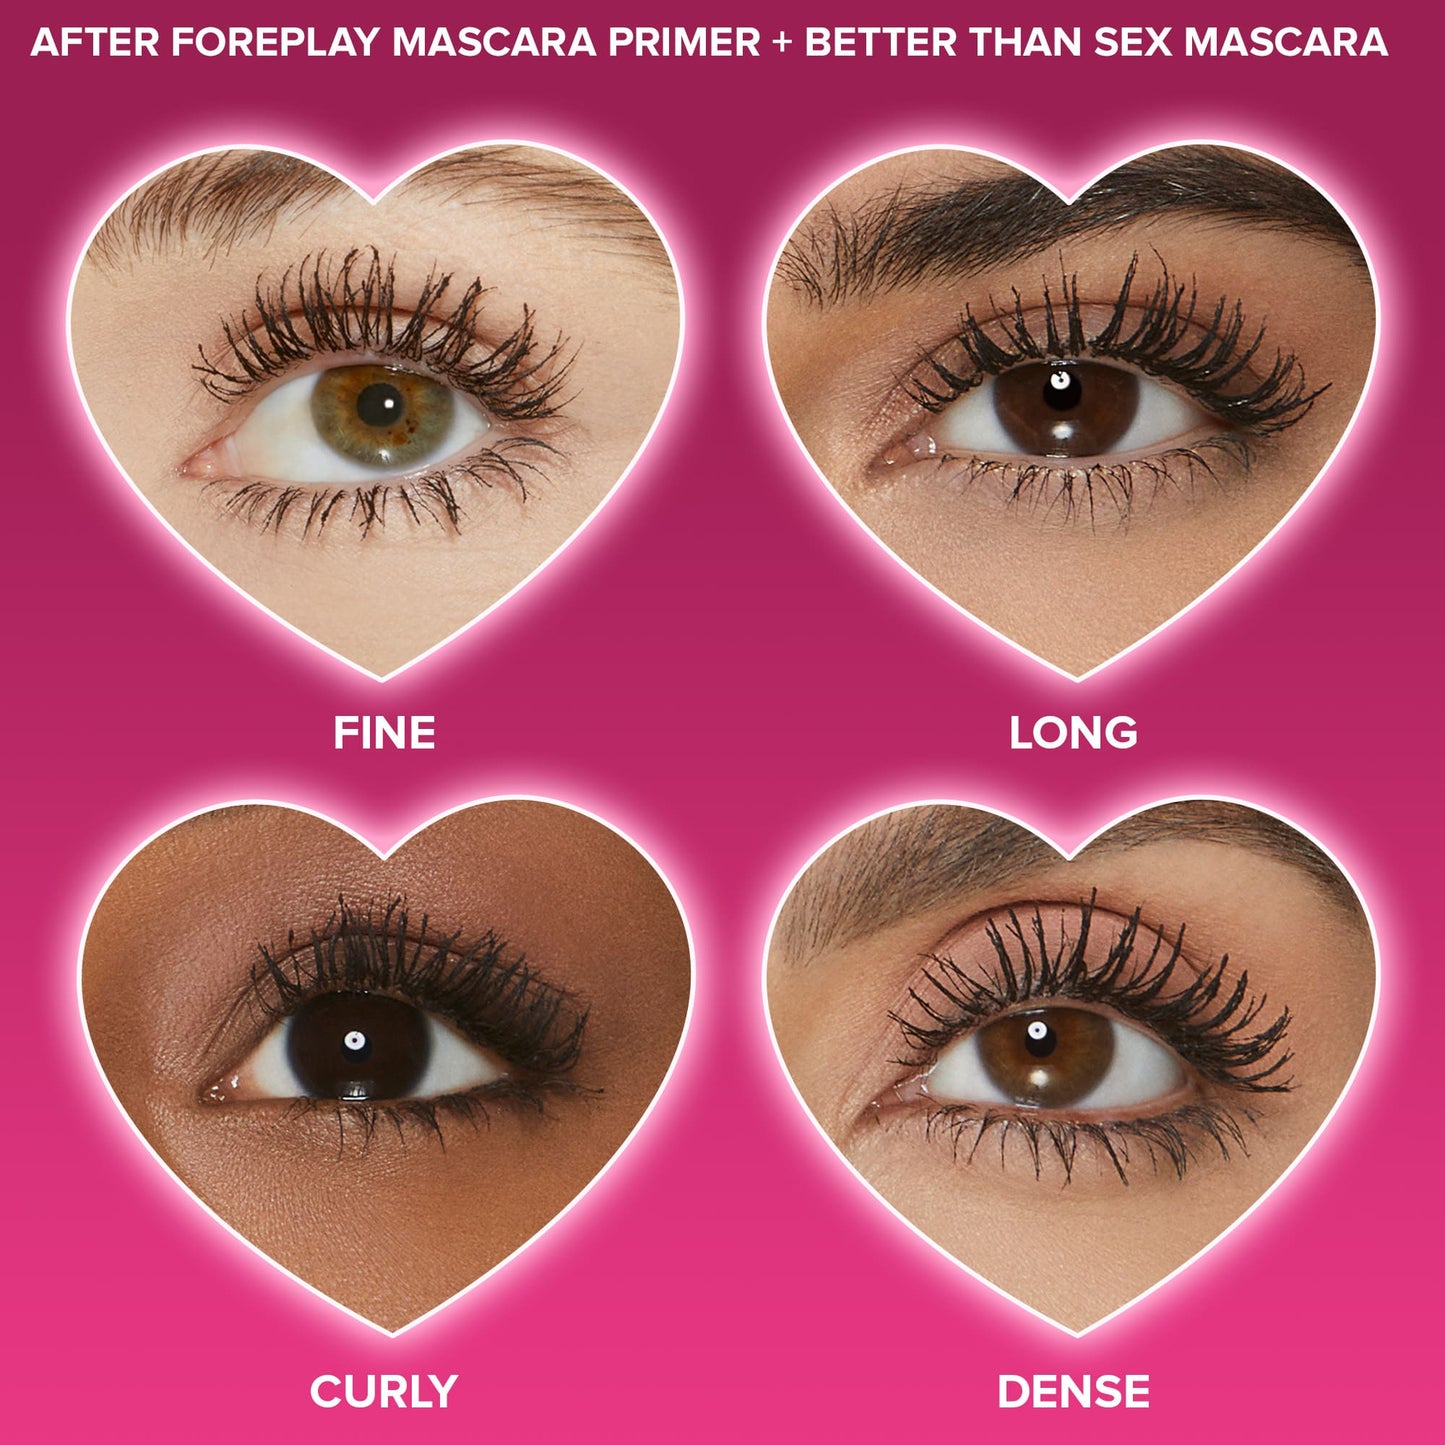 Better than sex foreplay mascara primer Too Faced